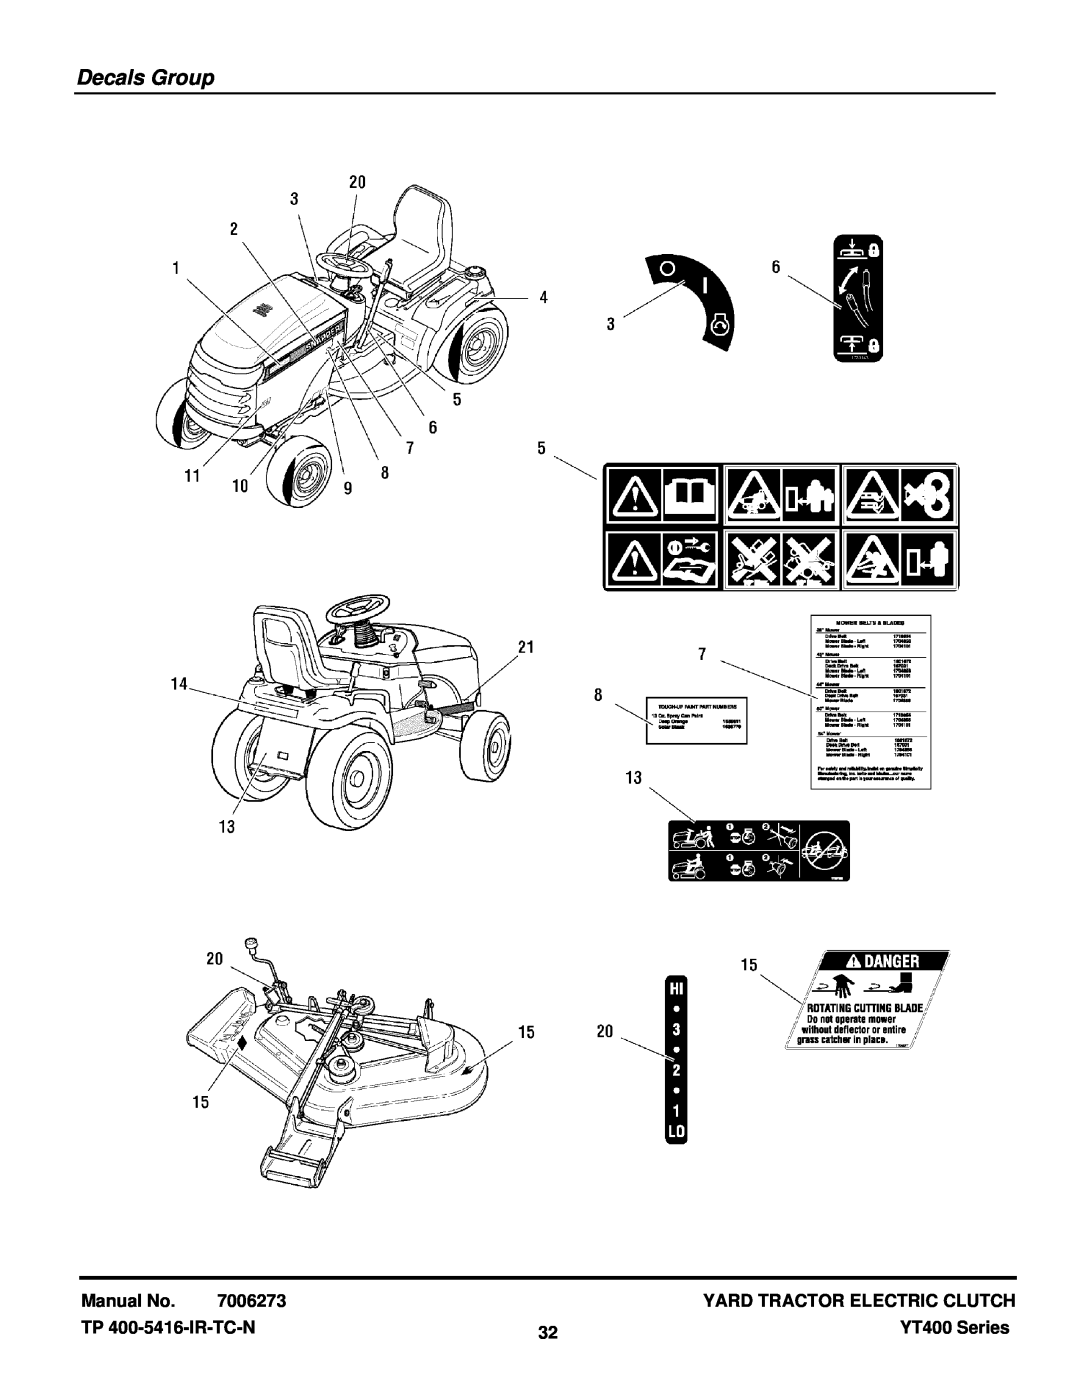 Snapper YT2350 4WD manual Decals Group, Manual No, 7006273, Yard Tractor Electric Clutch, TP 400-5416-IR-TC-N, YT400 Series 